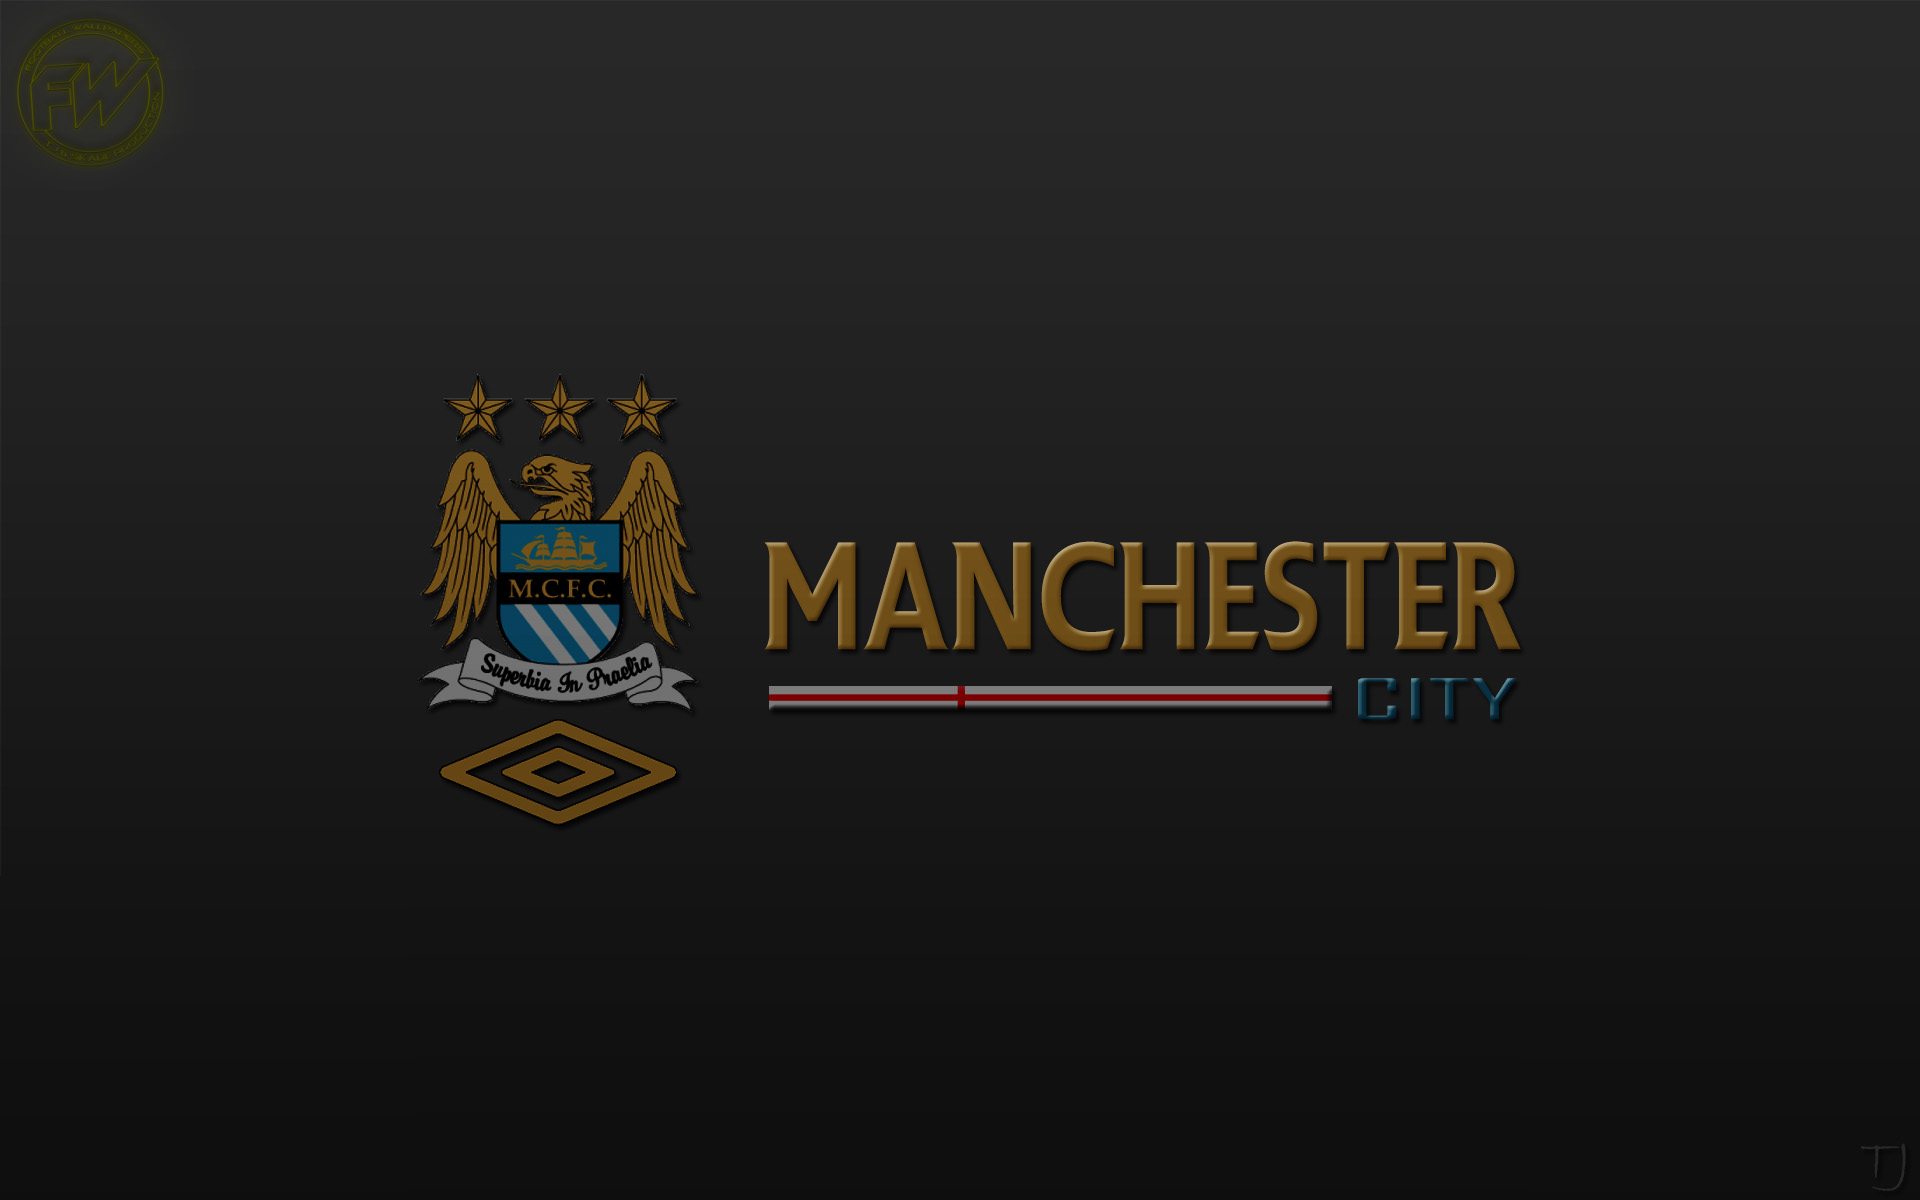 Manchester City Wallpaper Windows Themes Cool